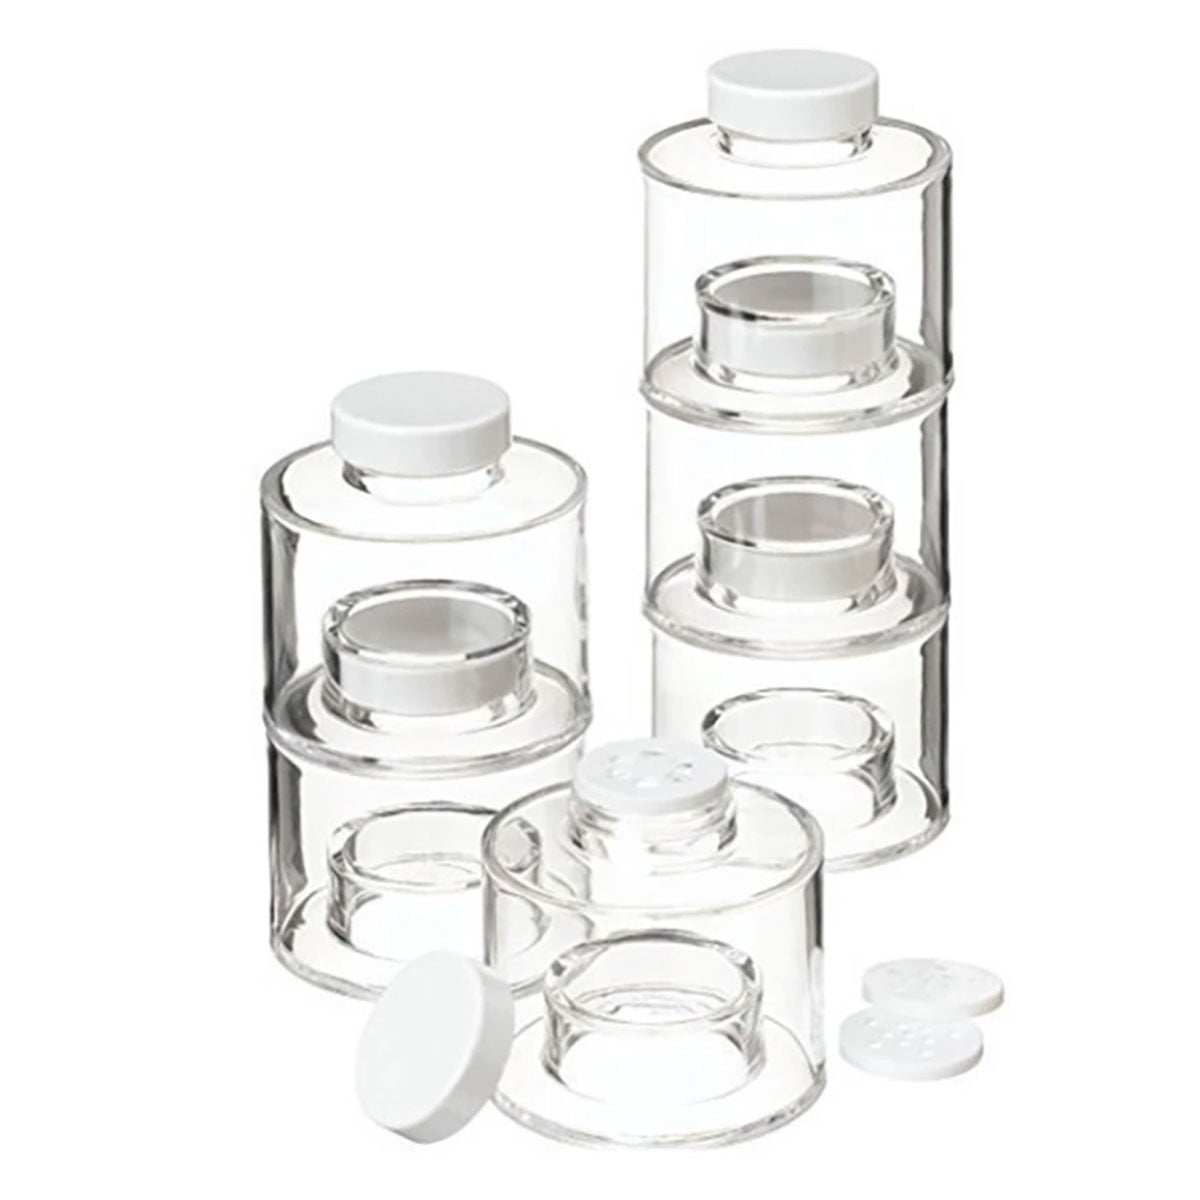 6pcs/set Clear Stackable Tower Shaped Spice Jars